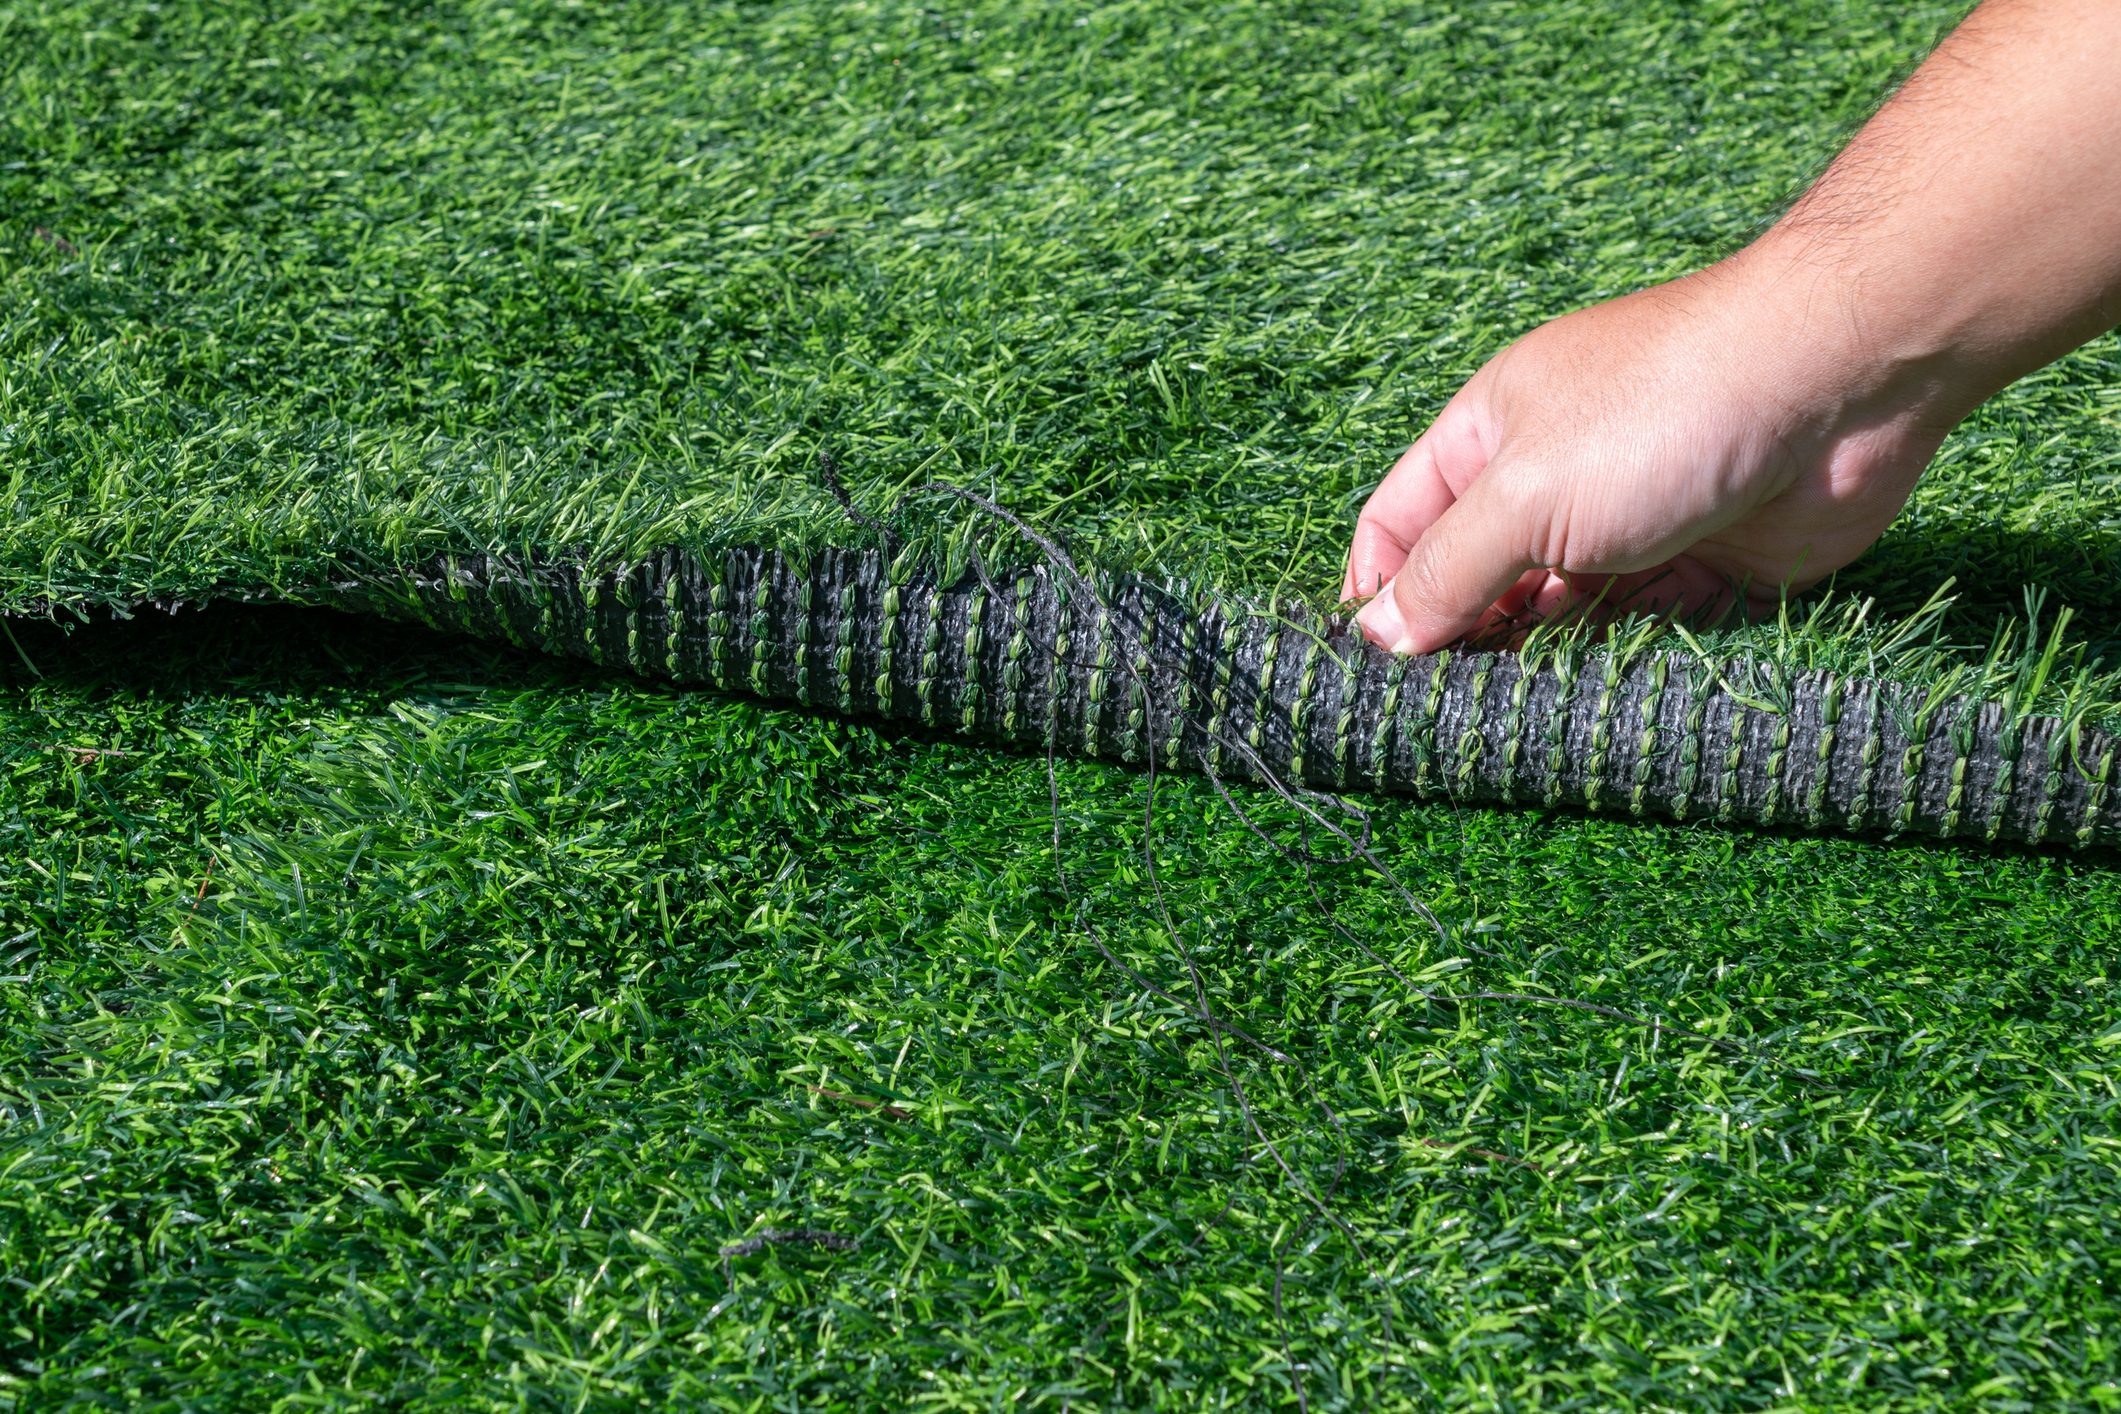 Someone hand pulling an artificial turf before replacement. Artificial turf is used for covering sport arena or garden.